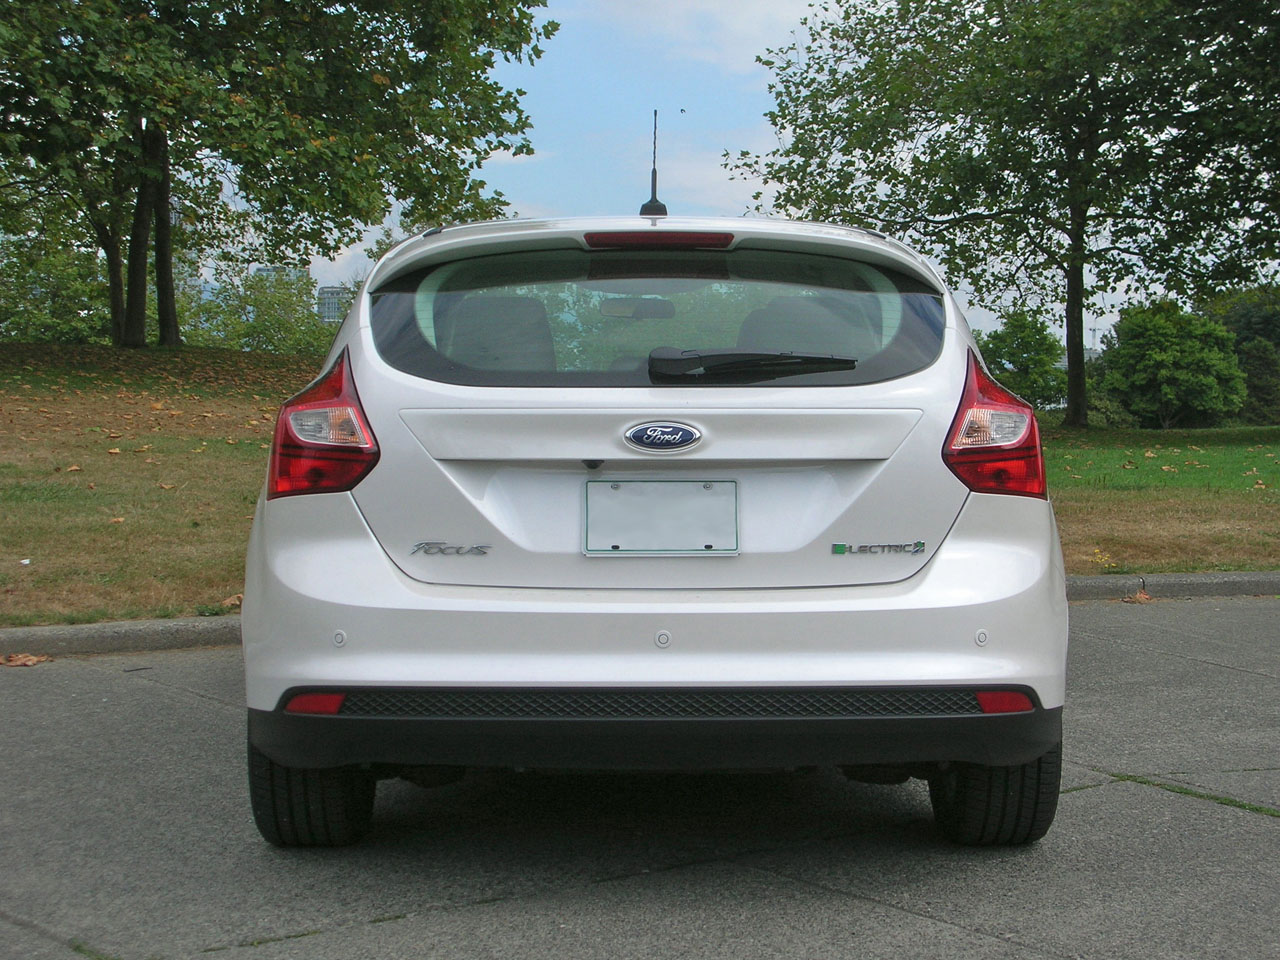 Ford focus electric review canada #8